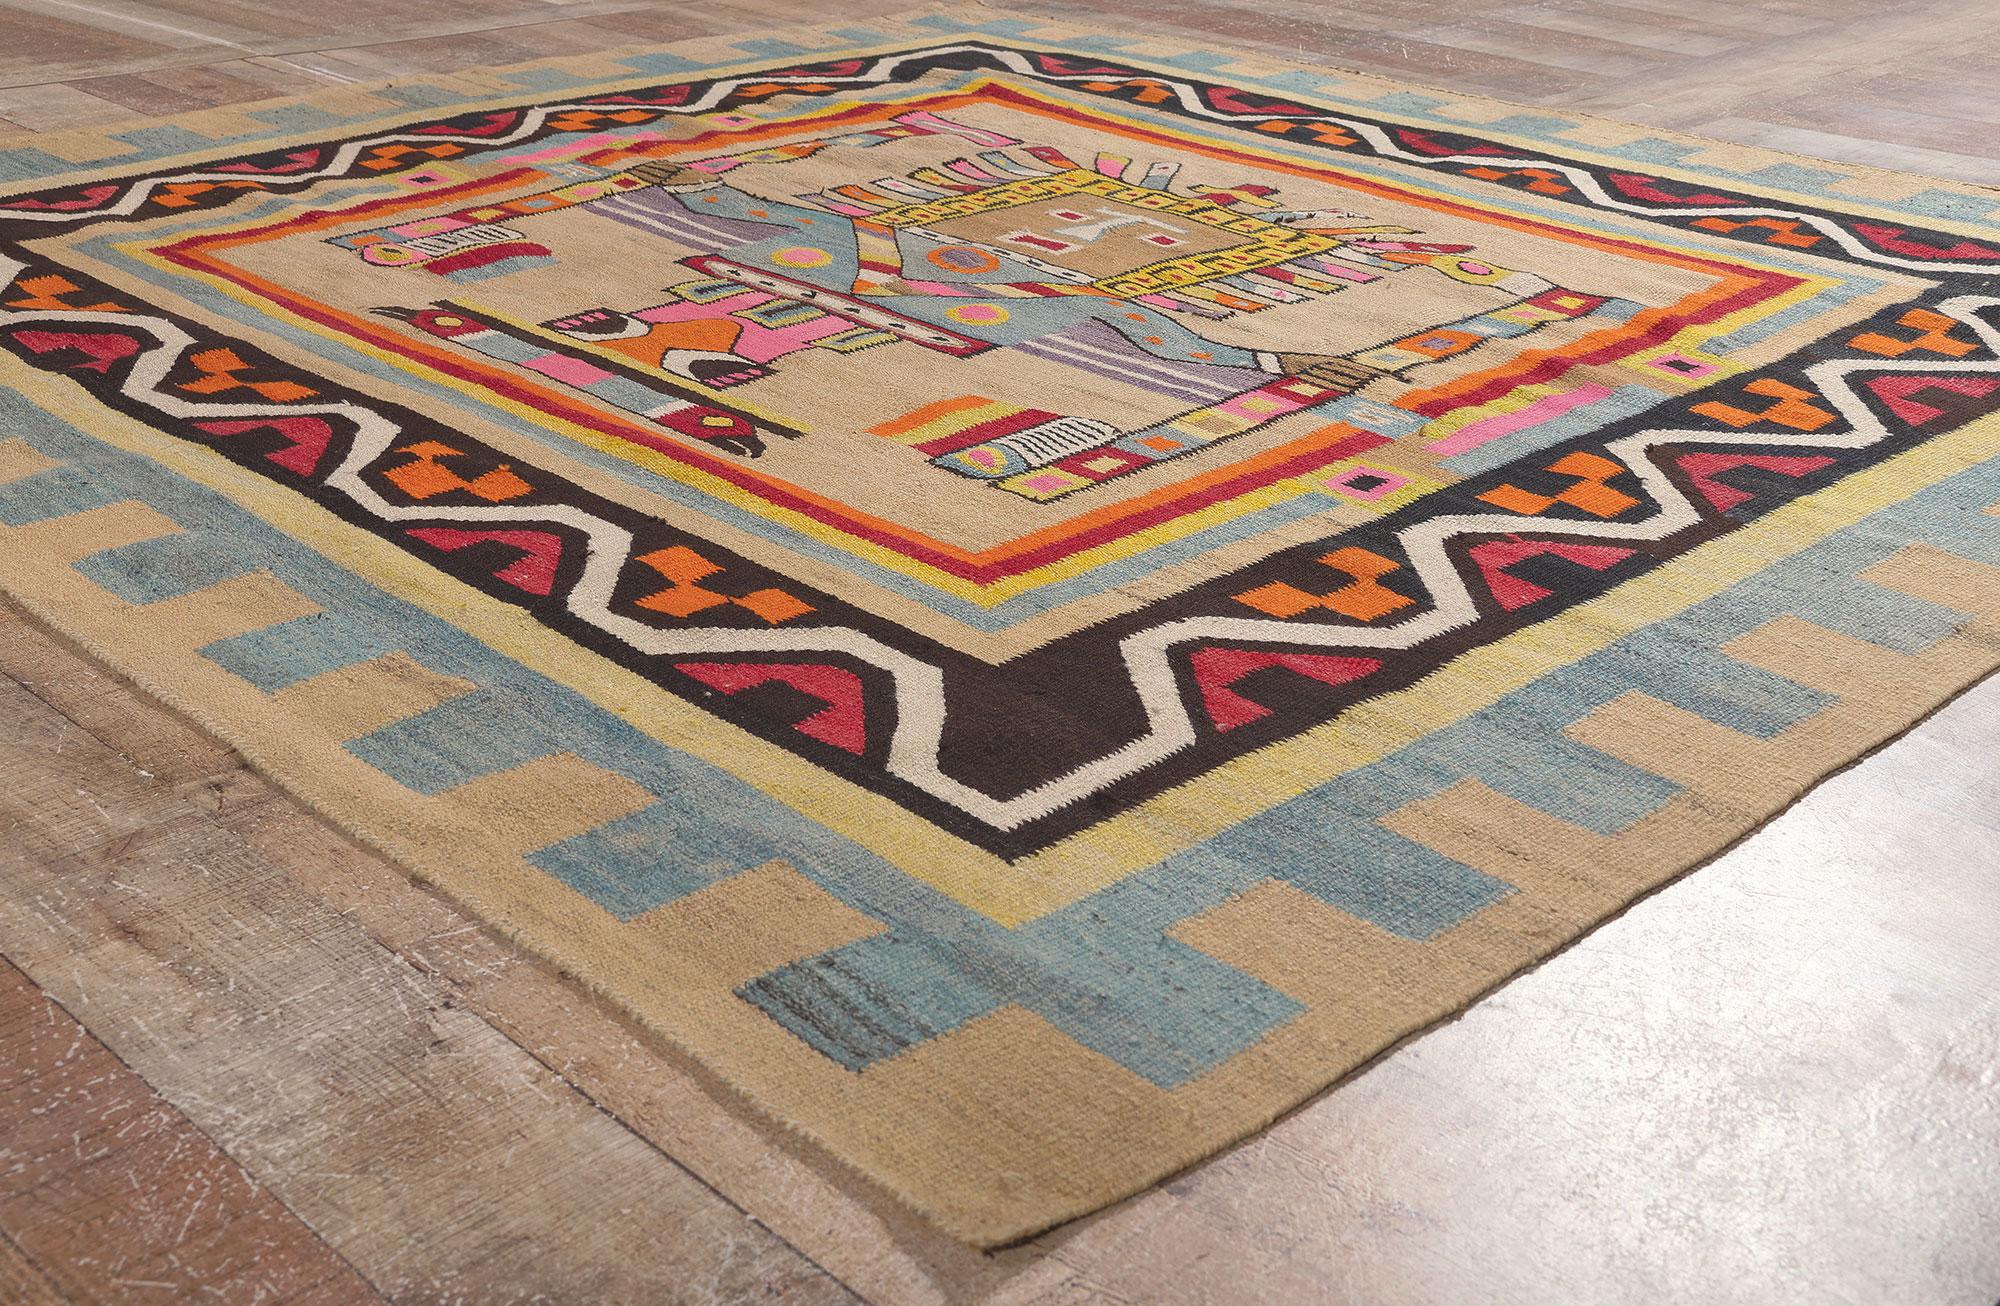 20th Century Colorful Vintage South American Kilim Rug with Pre-Incan Viracocha Deity  For Sale